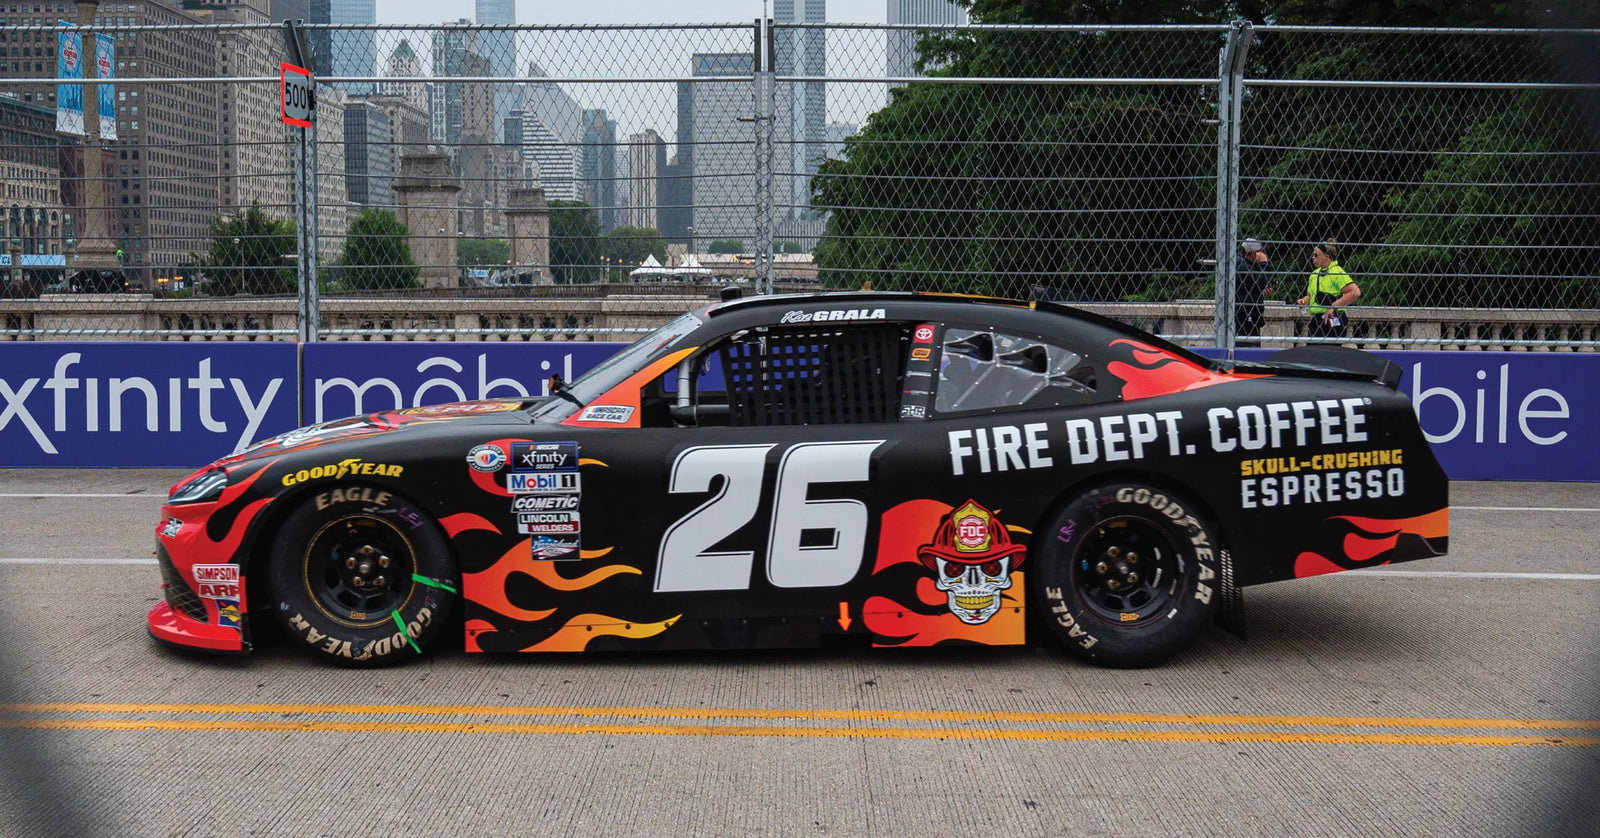 Fire Department Coffee Skull Crushing Espresso car scheme racing through the streets of Chicago.